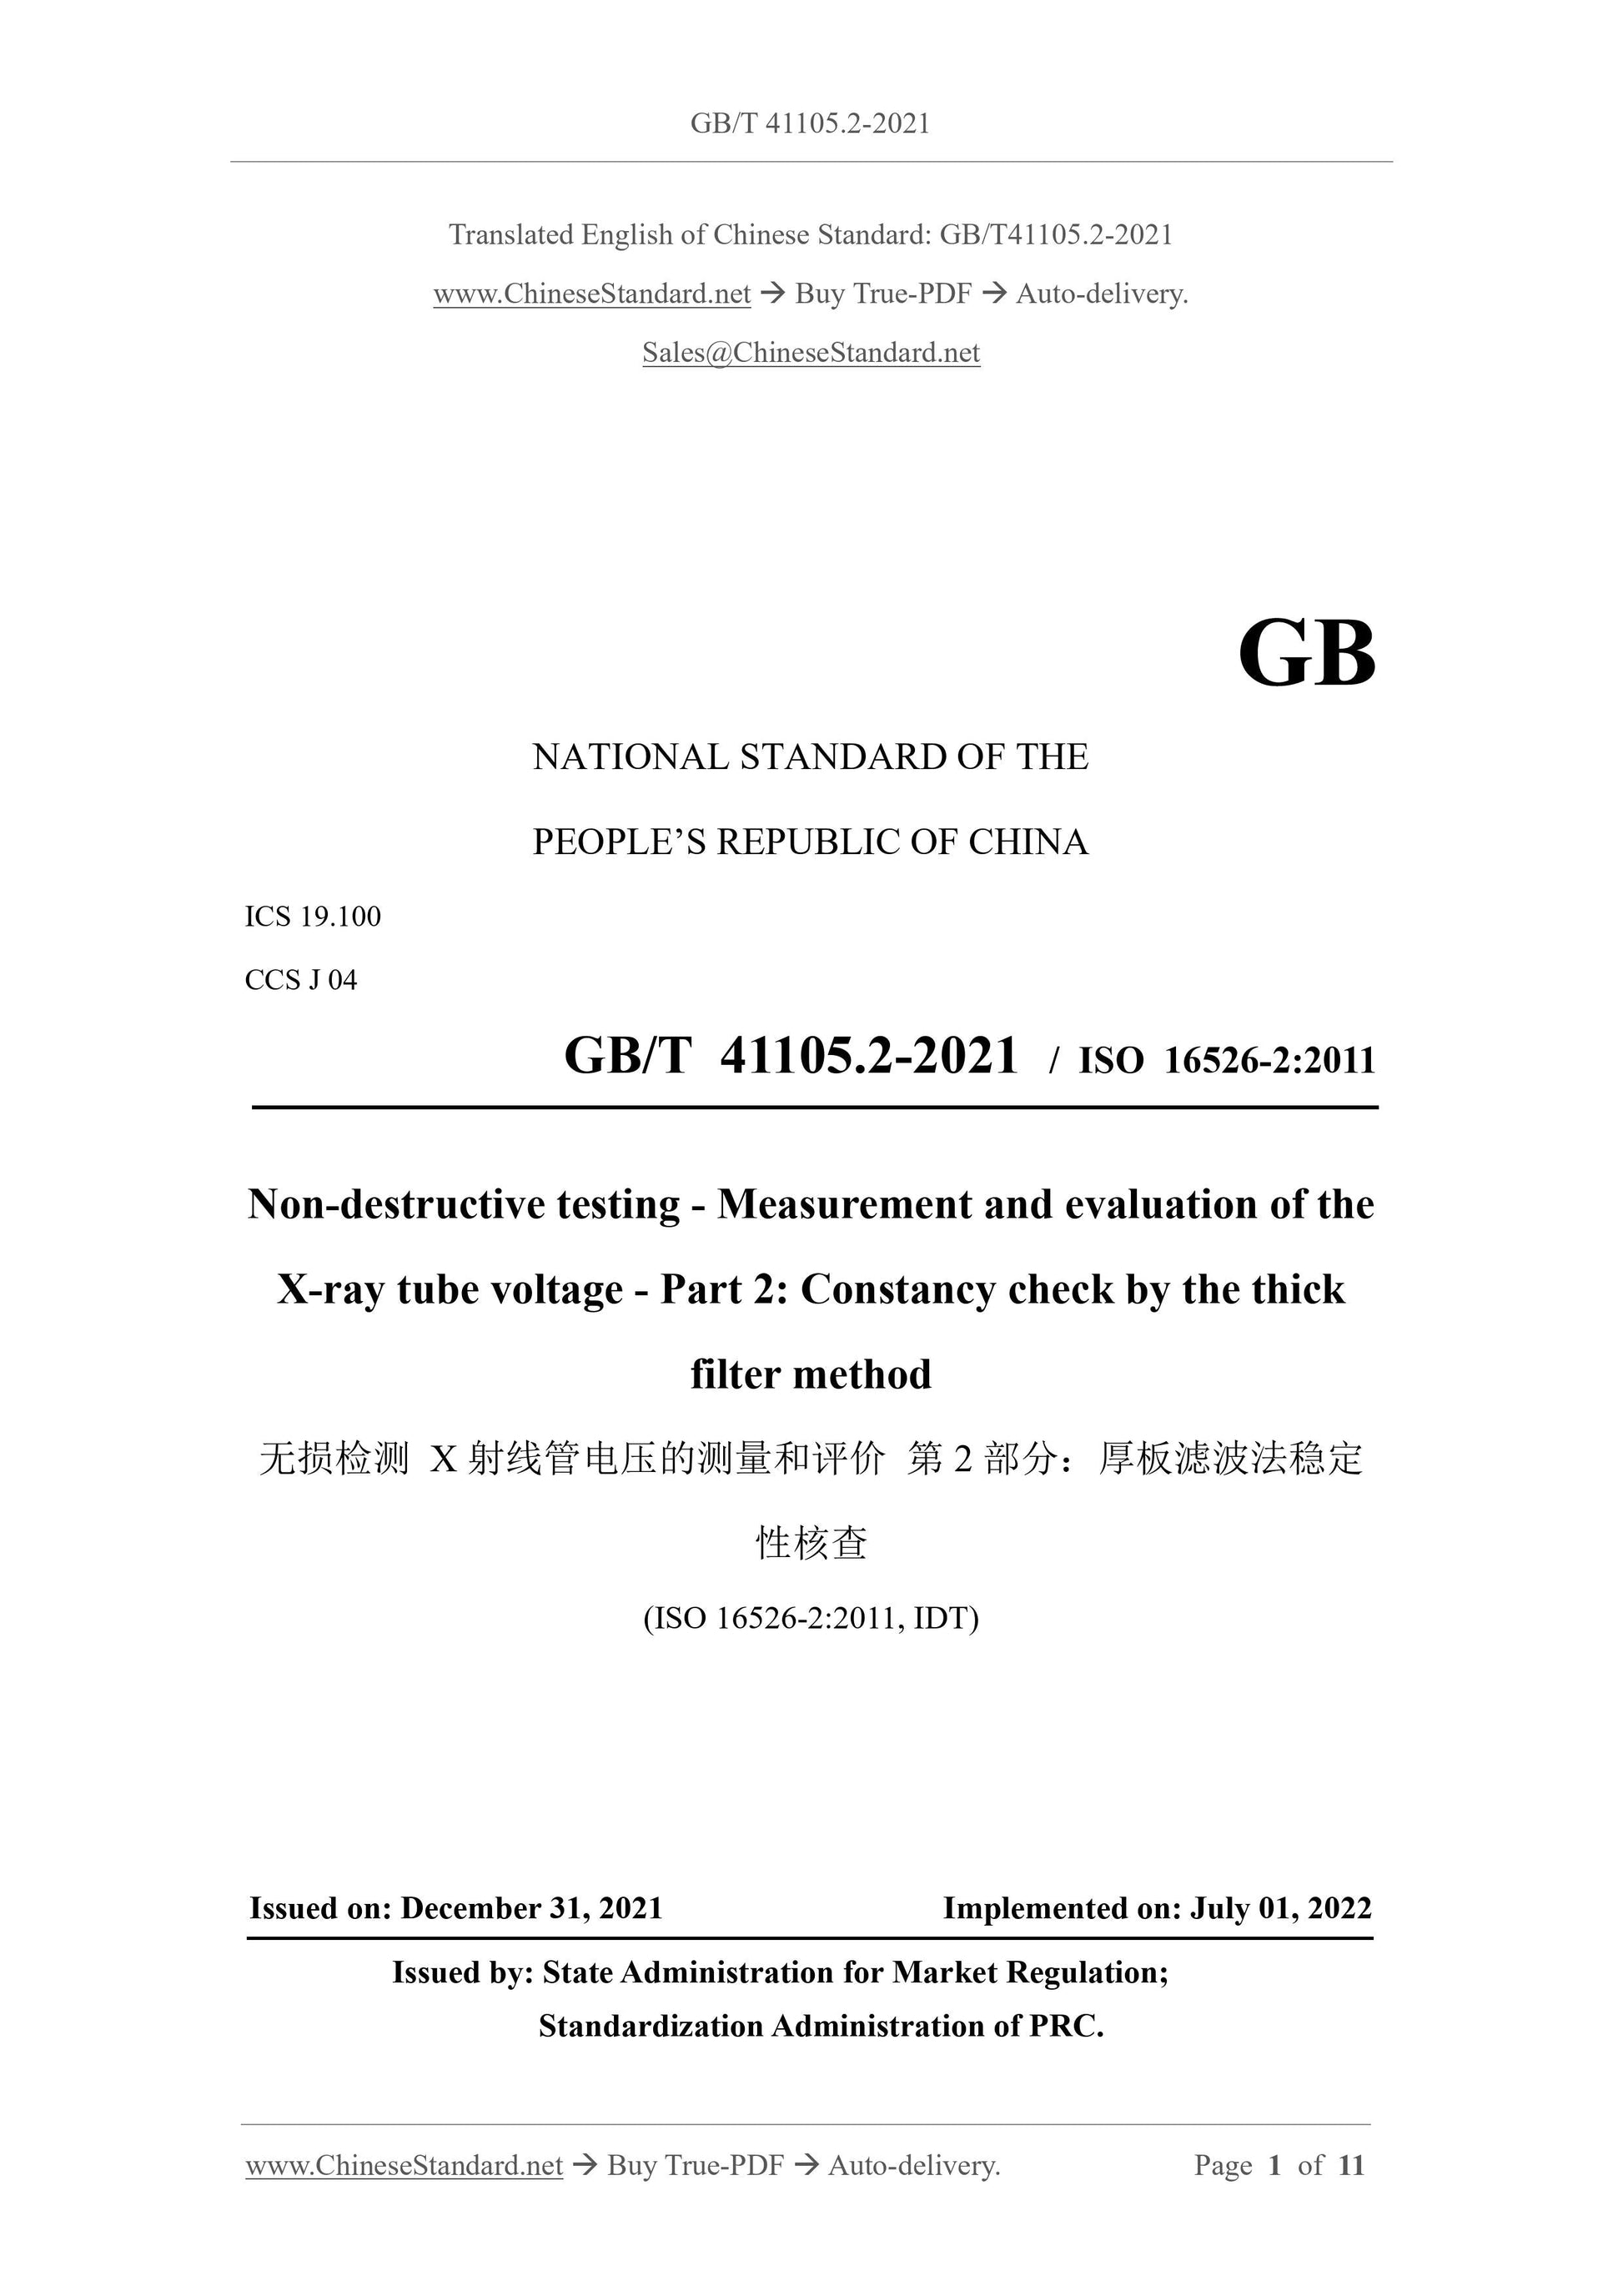 GB/T 41105.2-2021 Page 1